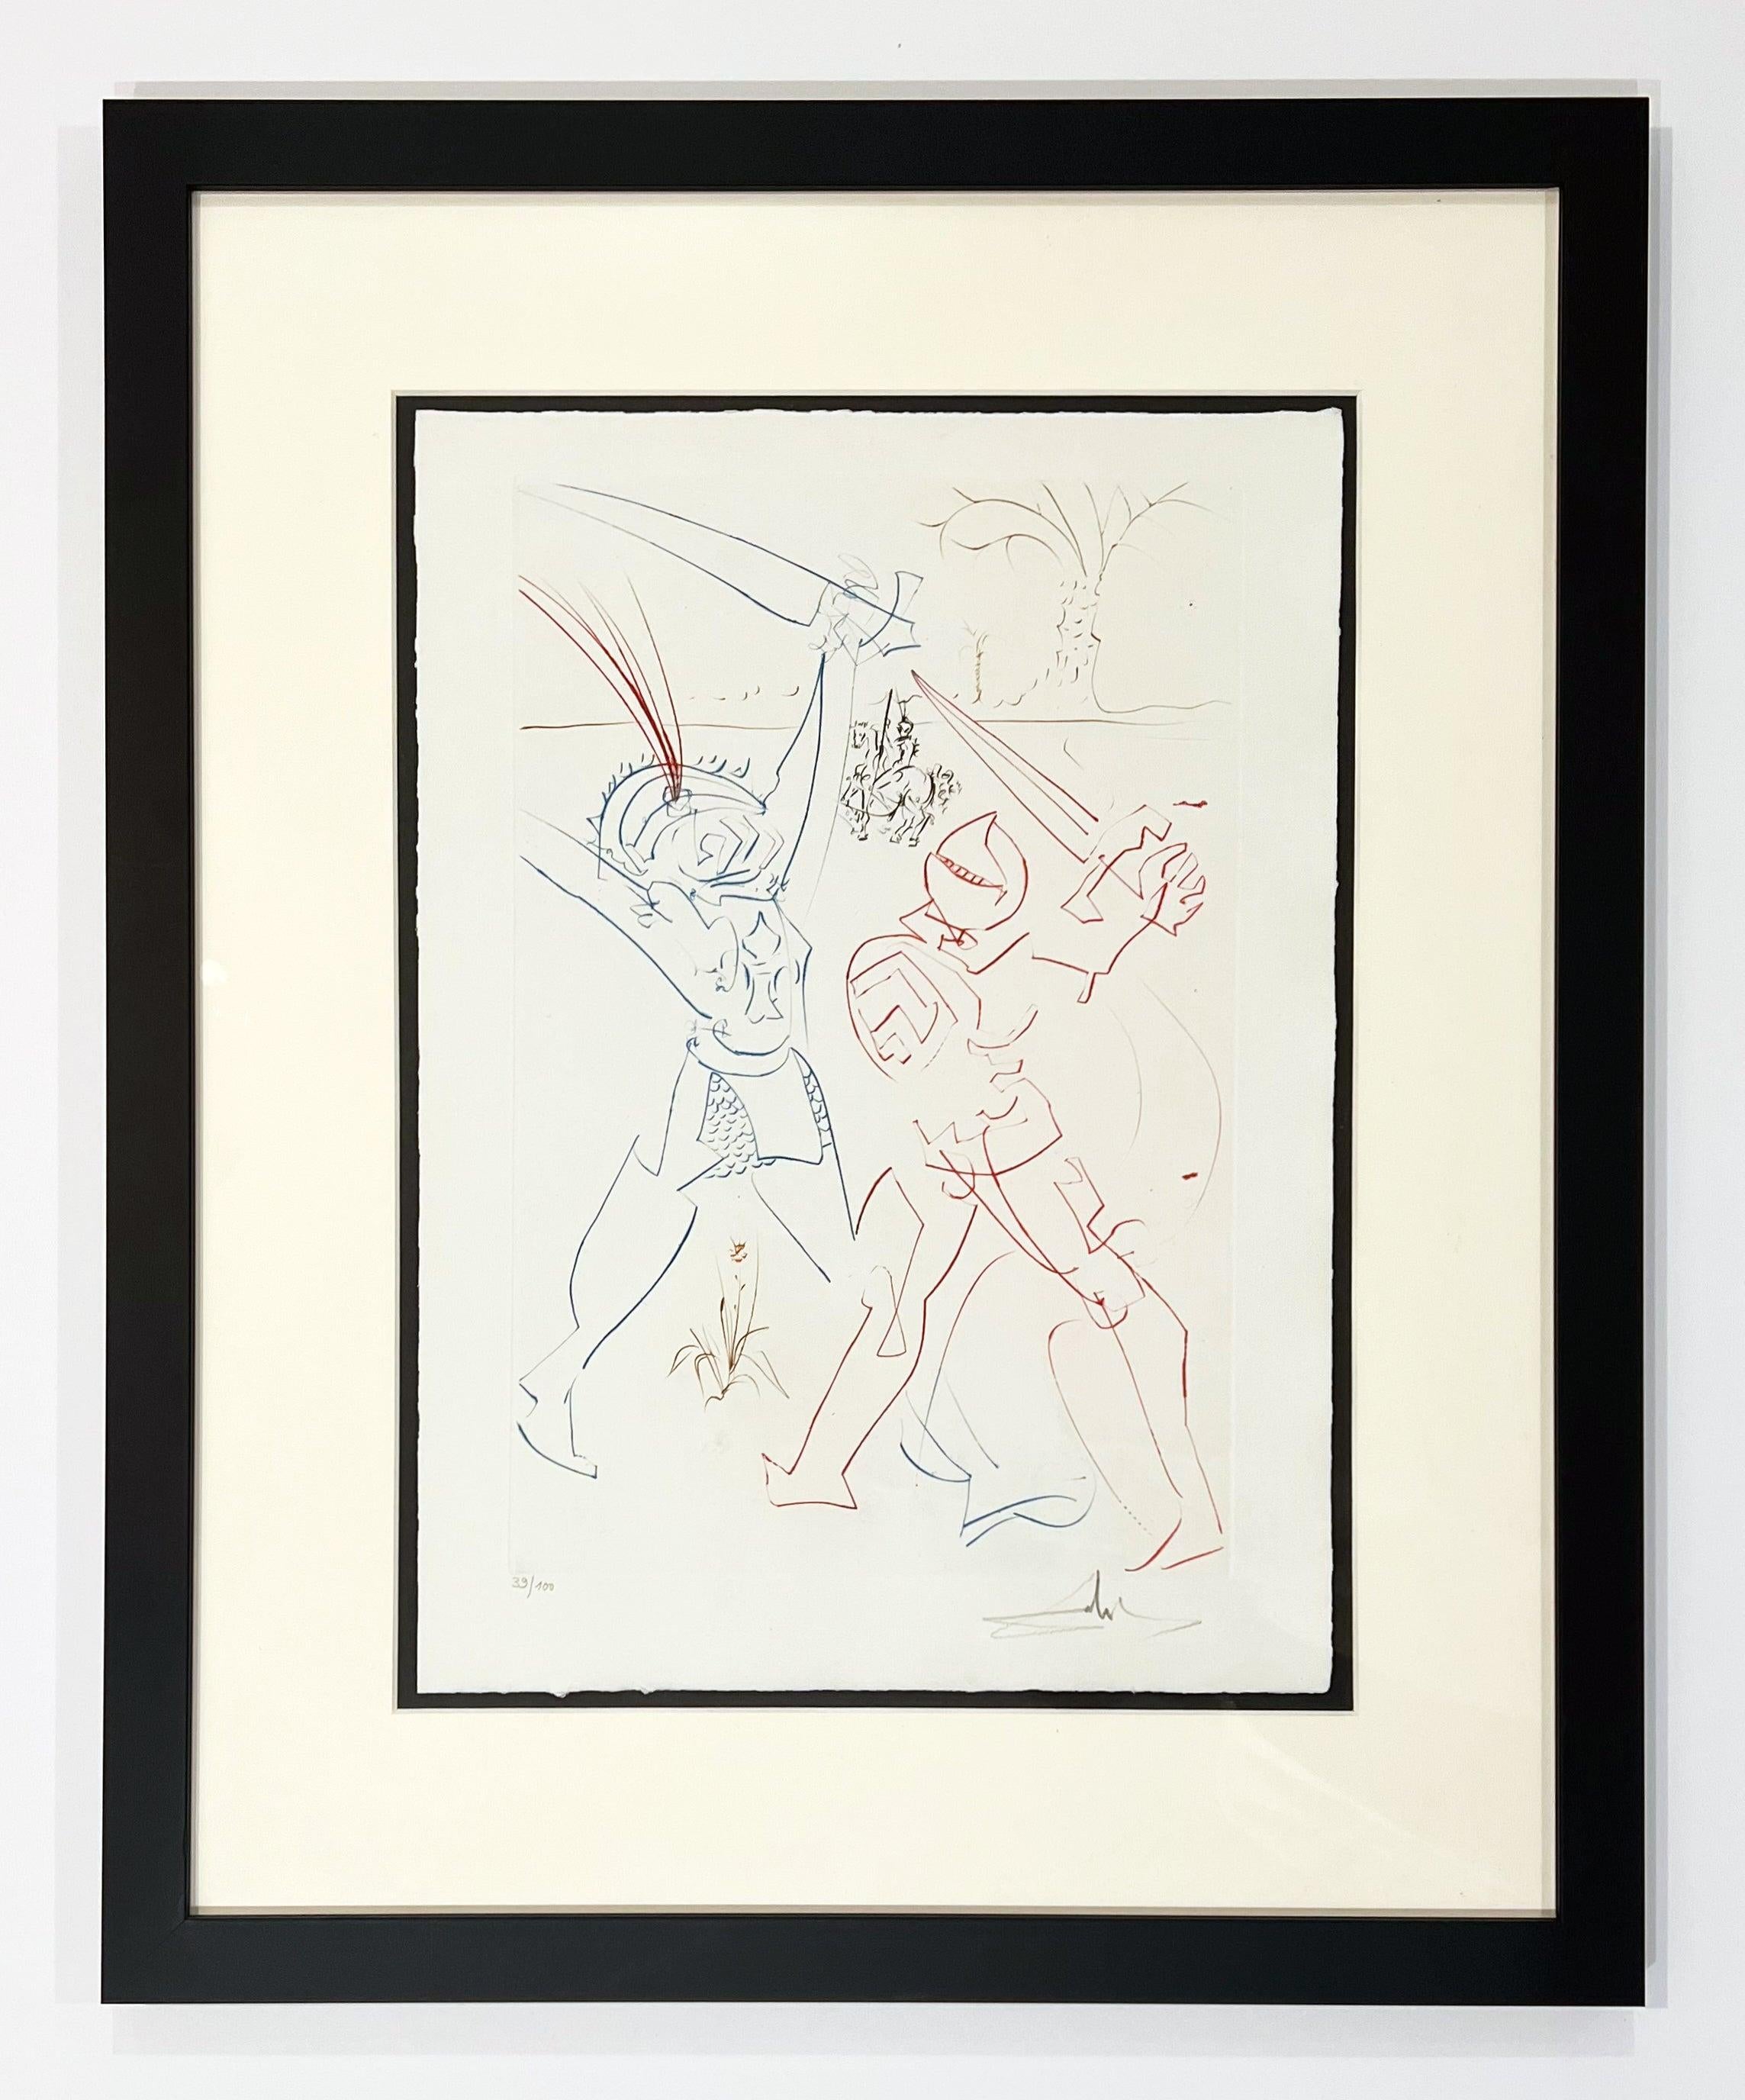 The Tournament of Galore, from The Quest for the Grail  - Print by Salvador Dalí